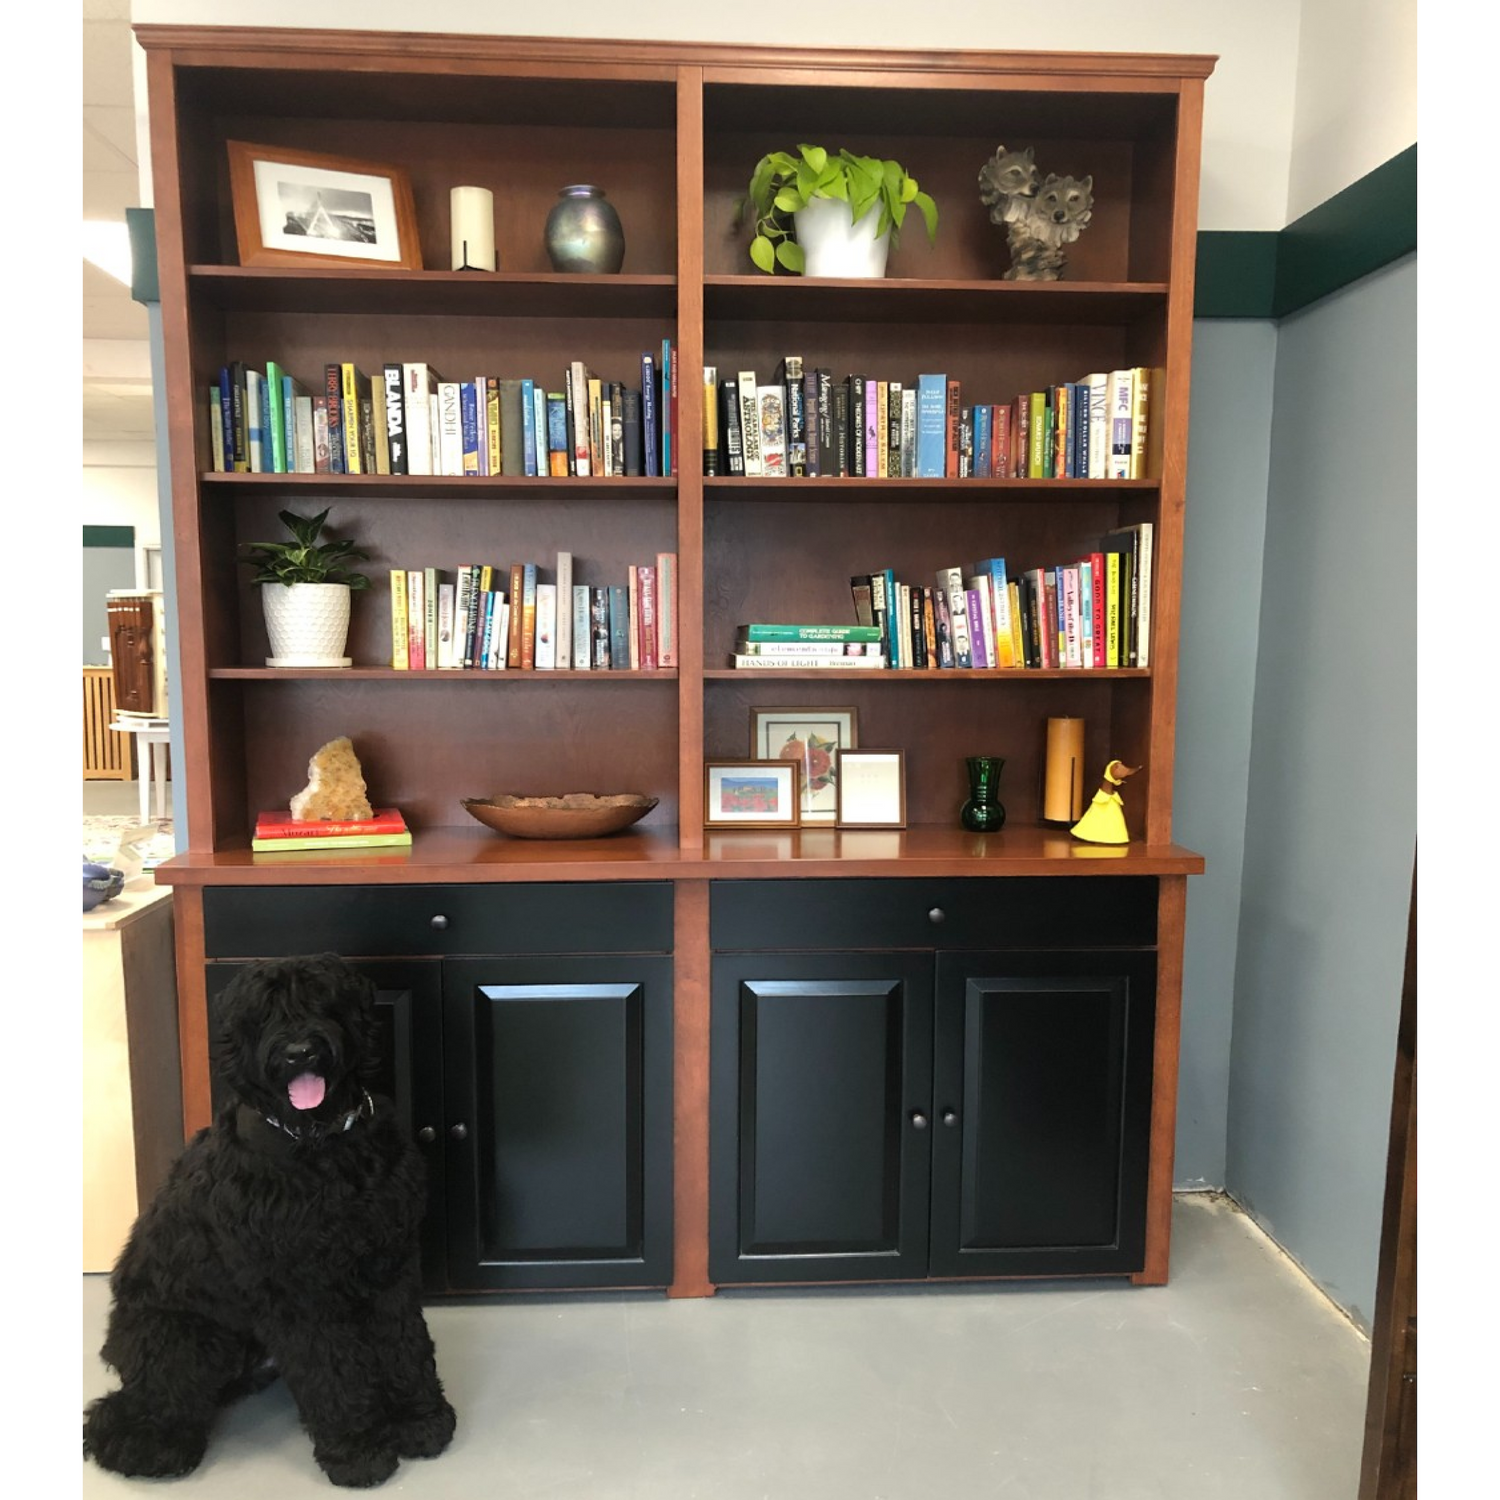 Bookcase with a dog beside it